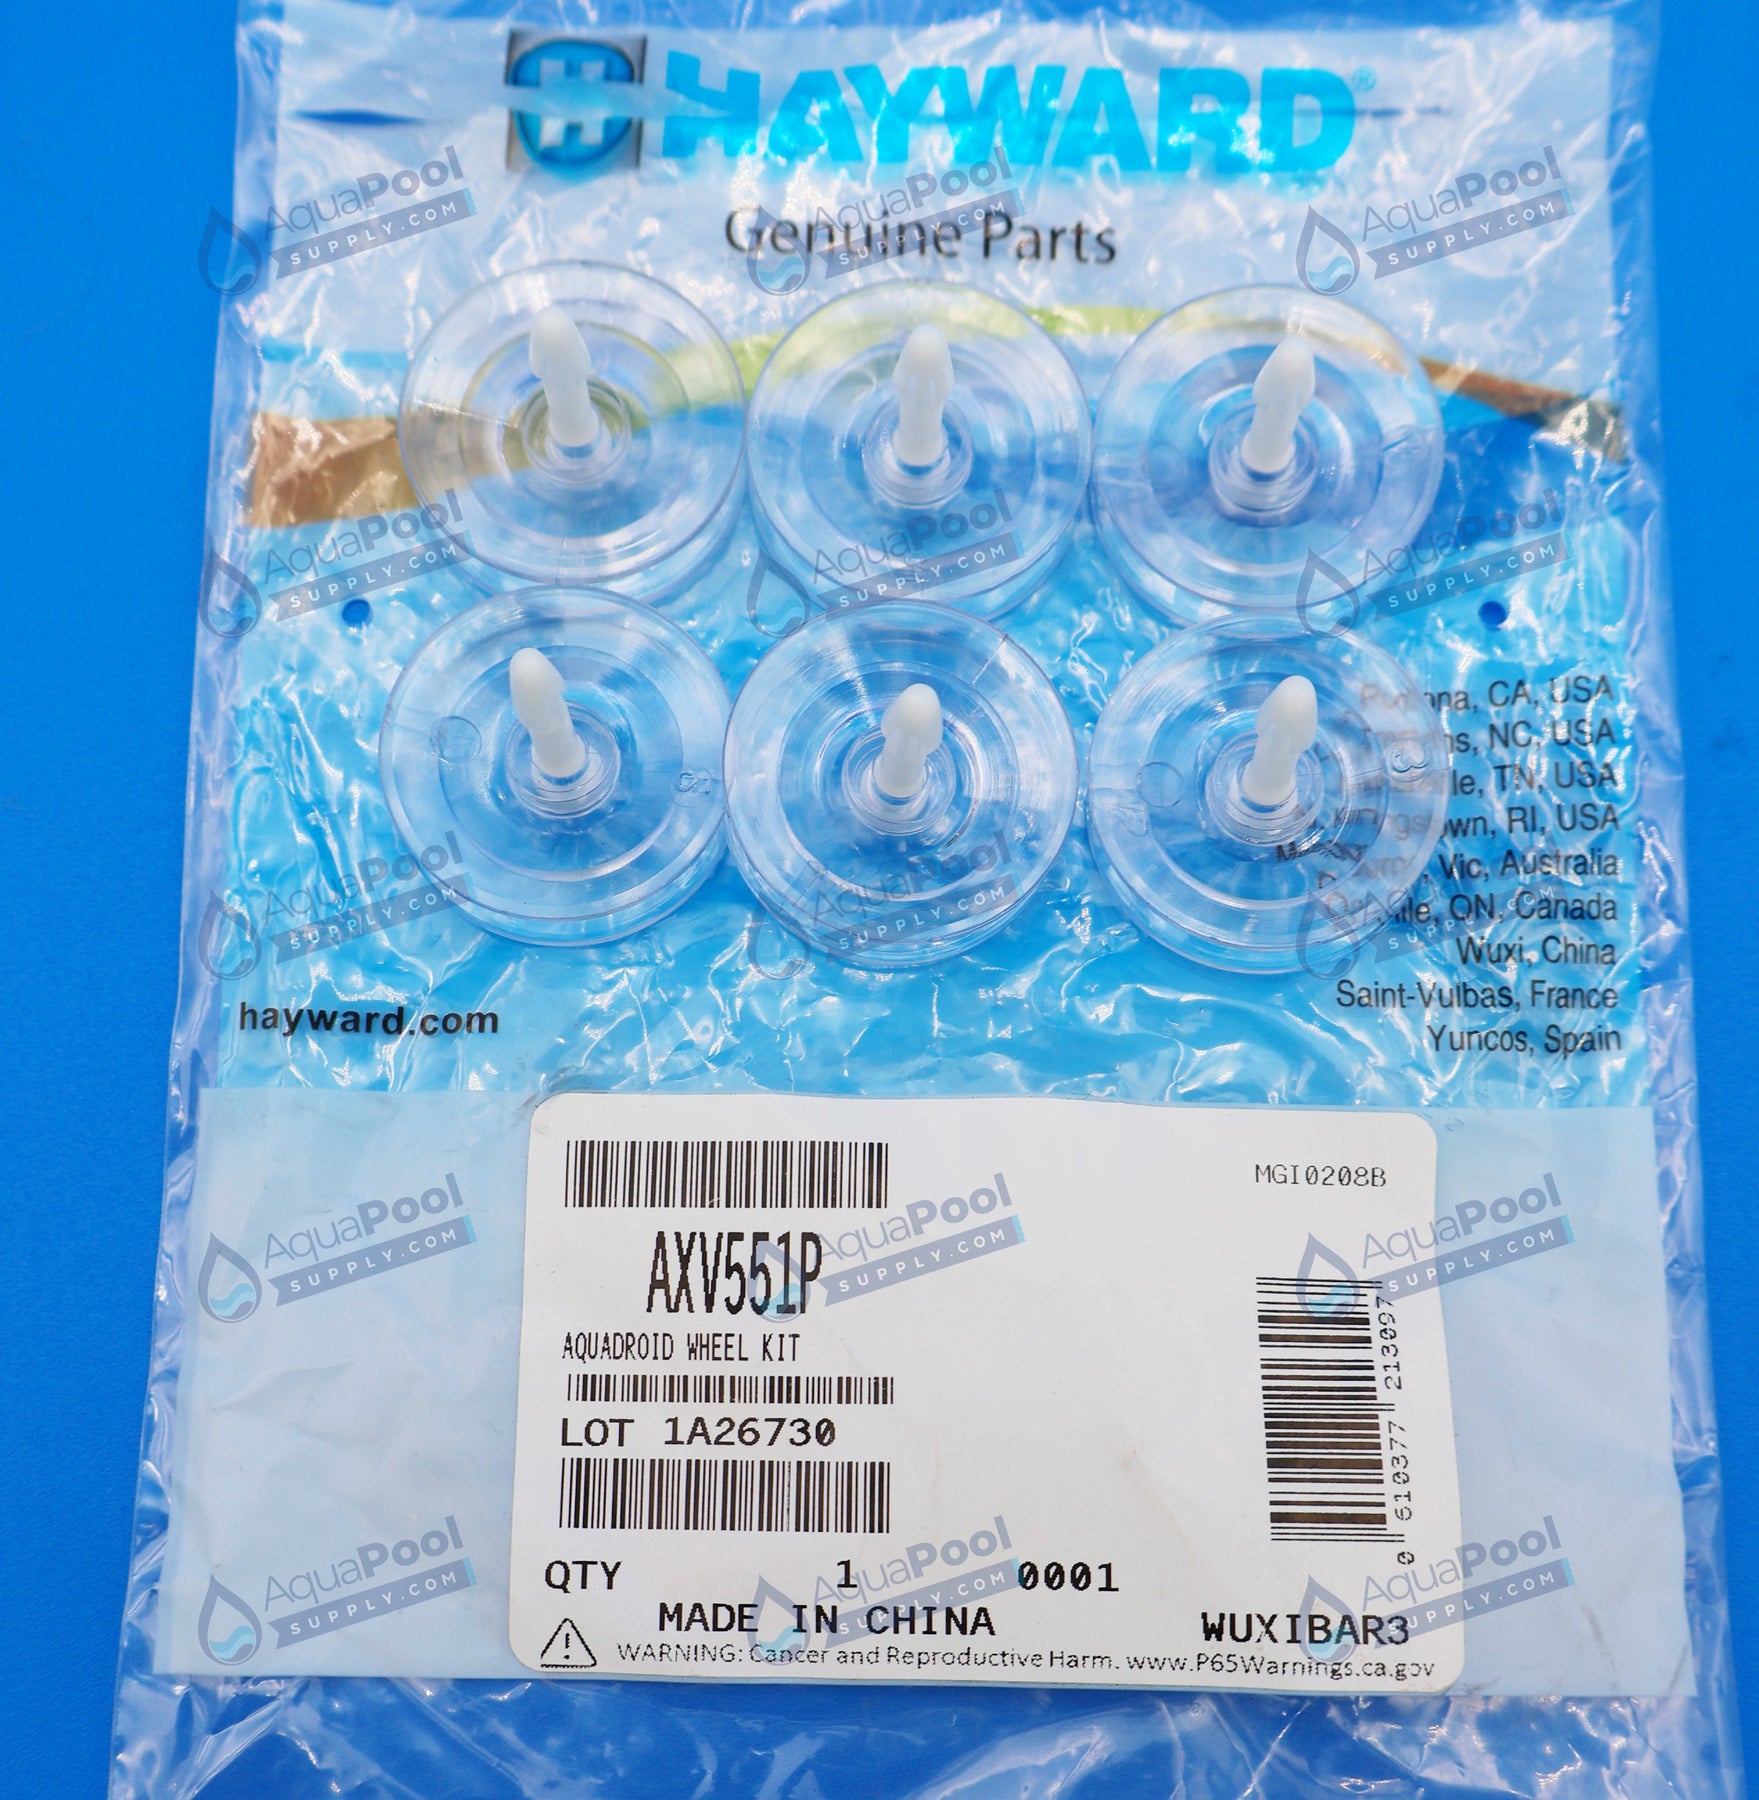 Hayward Wheel Kit for AquaBug, Penguin, Wanda the Whale, Diver Dave - Includes 6 Wheels and Axles AXV551P